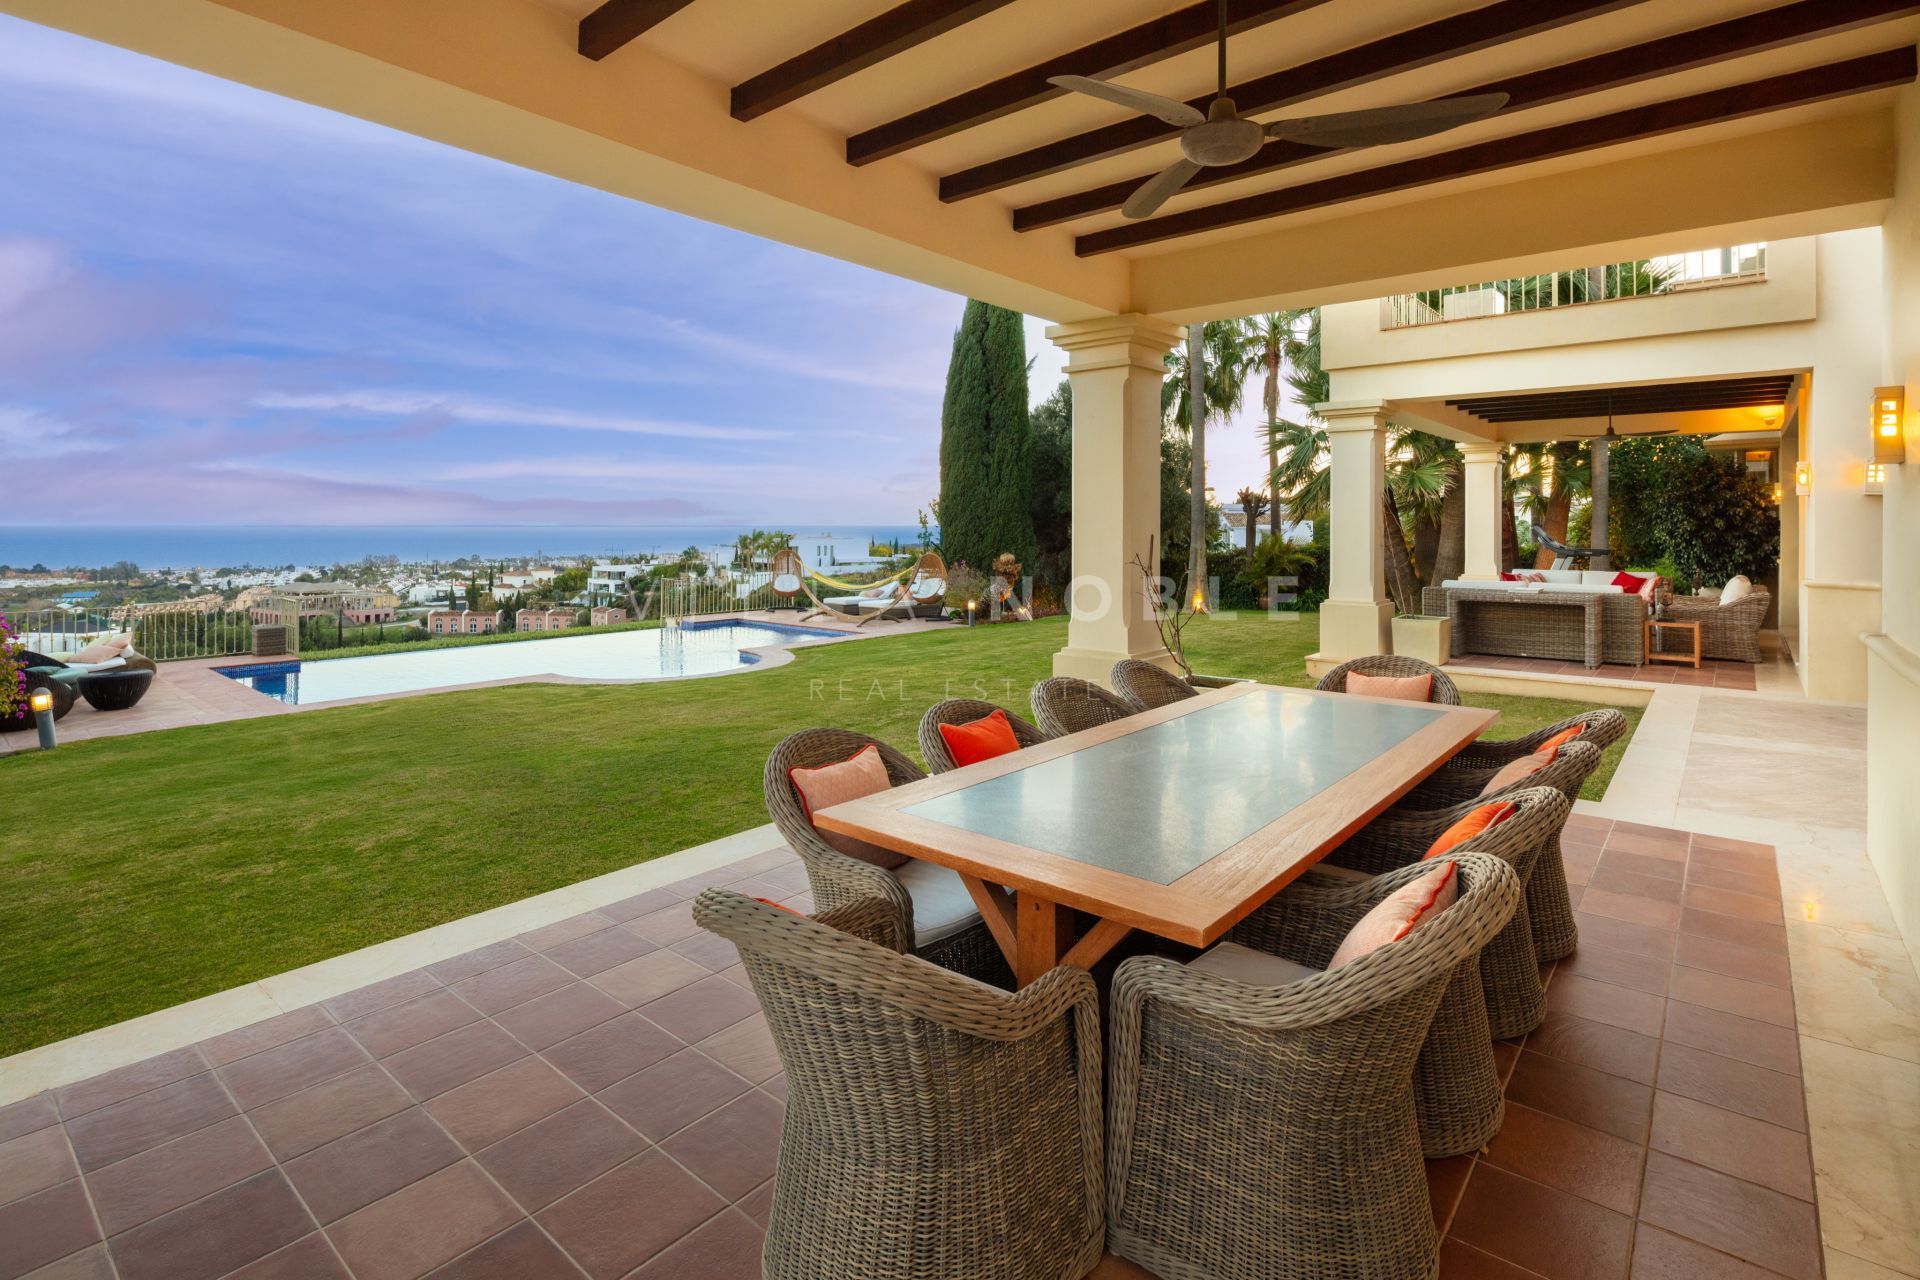 Charming and luxurious villa in the 5-Star community of Los Flamingos, in Benahavís